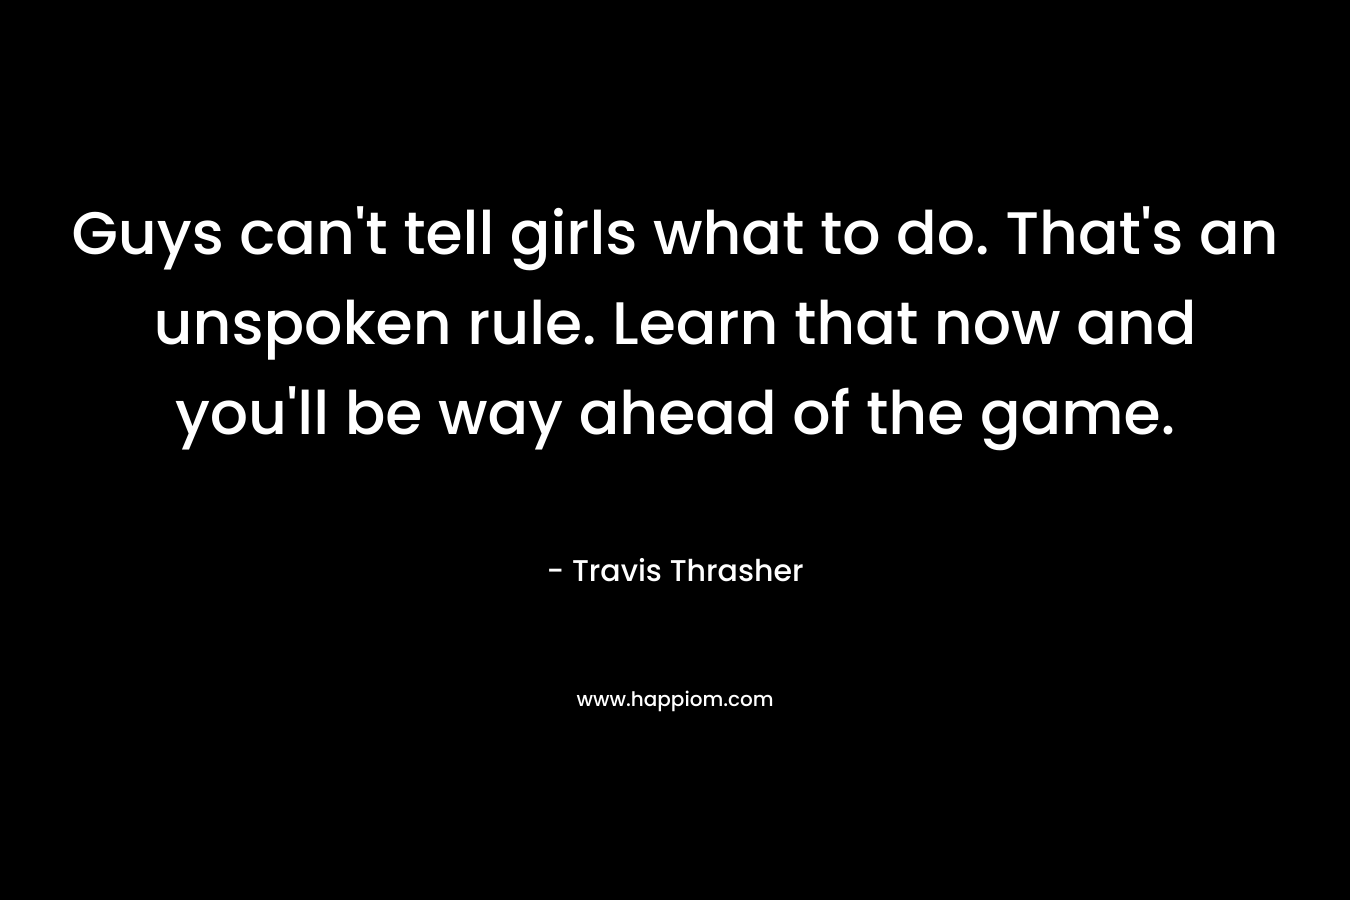 Guys can’t tell girls what to do. That’s an unspoken rule. Learn that now and you’ll be way ahead of the game. – Travis Thrasher